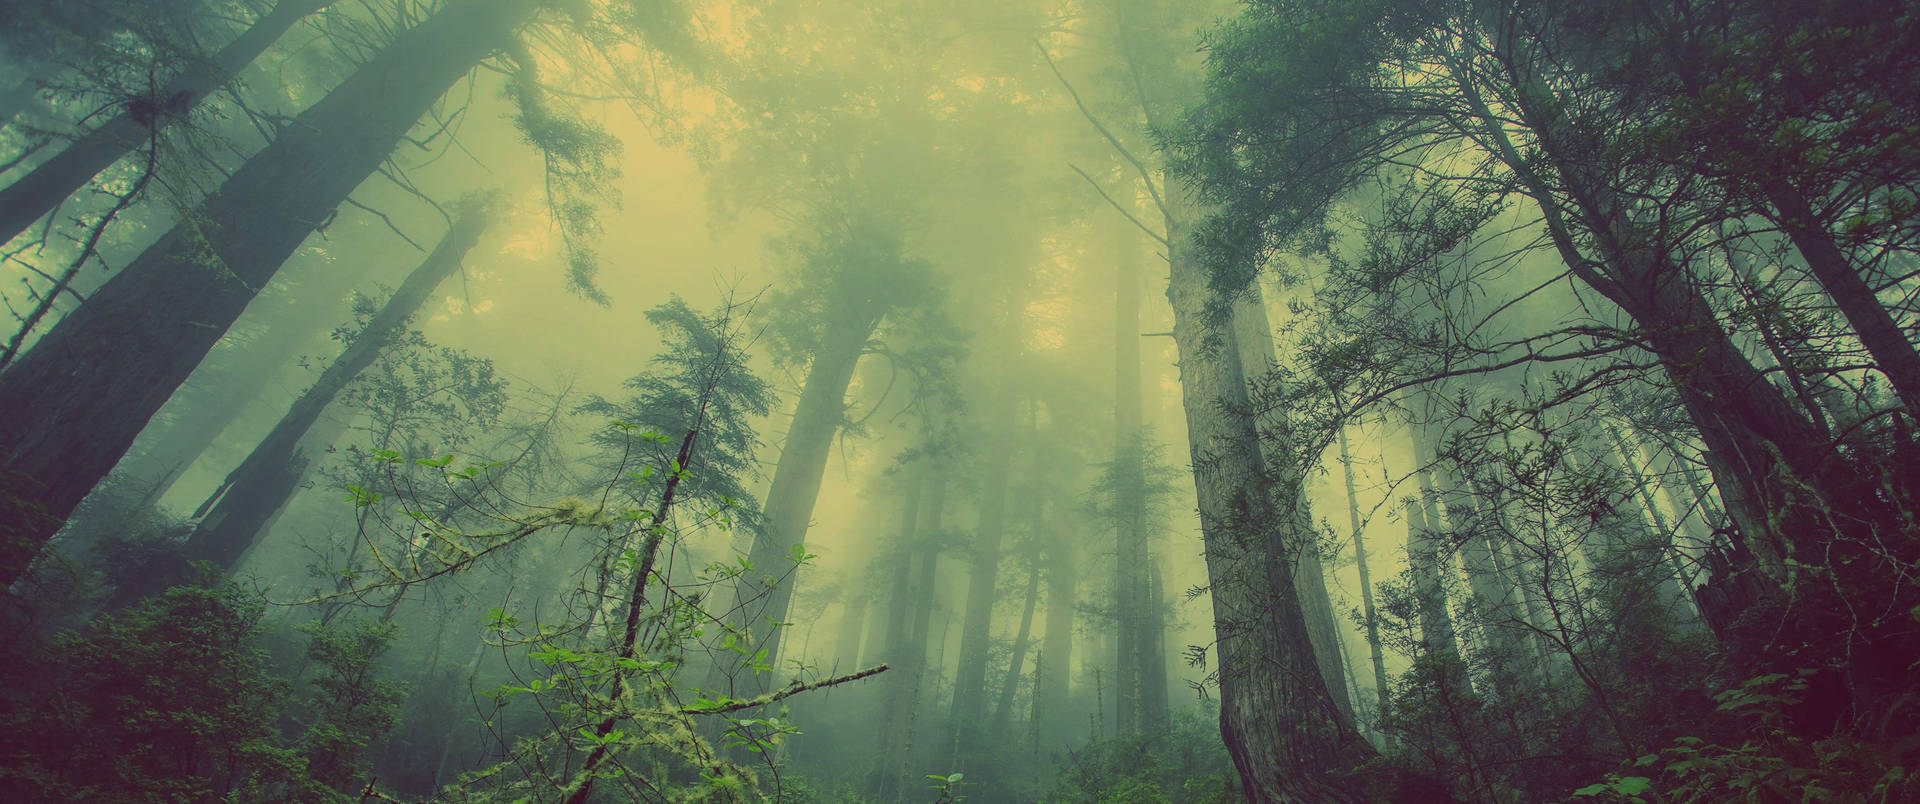 Ultrawide forest trees showing the tall branches on a smoky place.